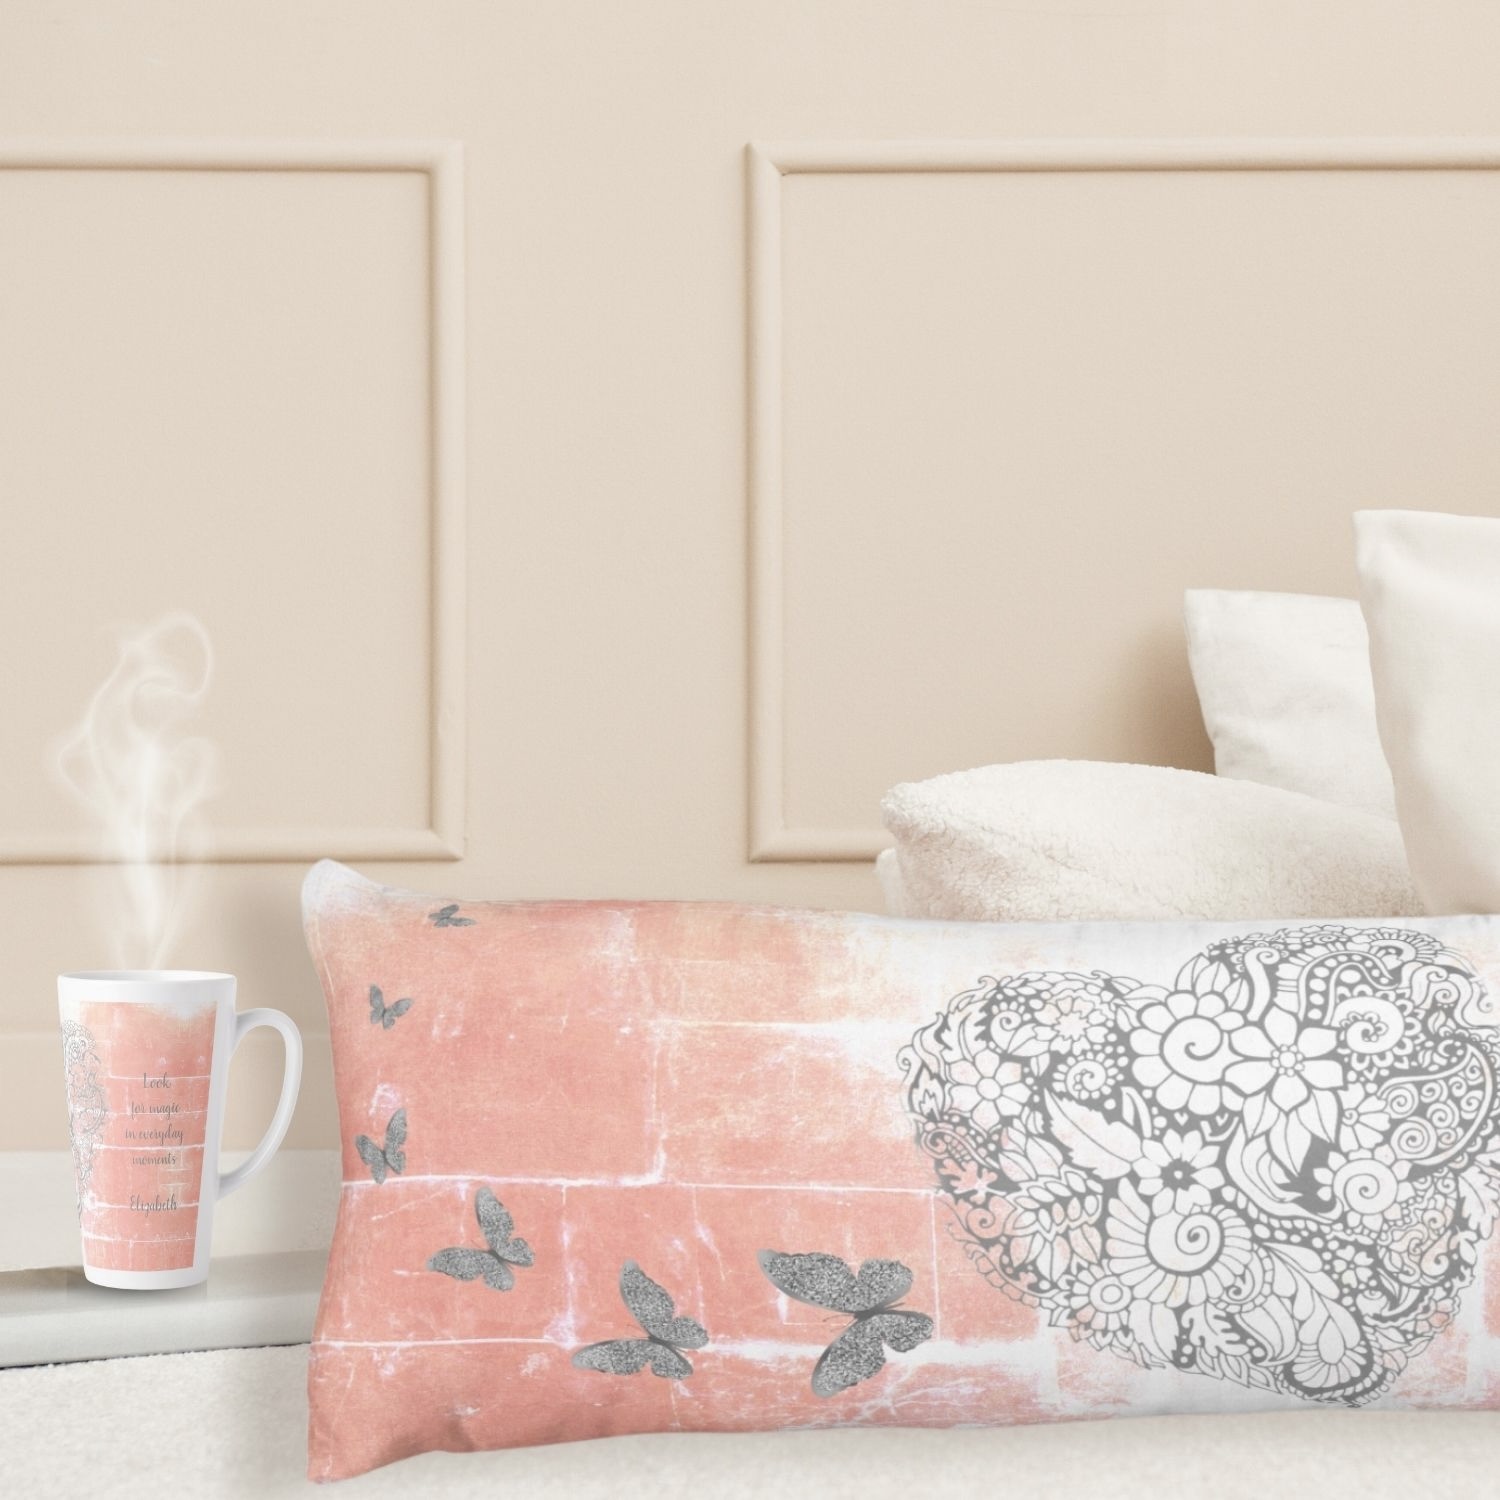 Rustic peach body pillow and latte mug with inspiring silver hearts, enhancing comfort and style in a serene bedroom setting.